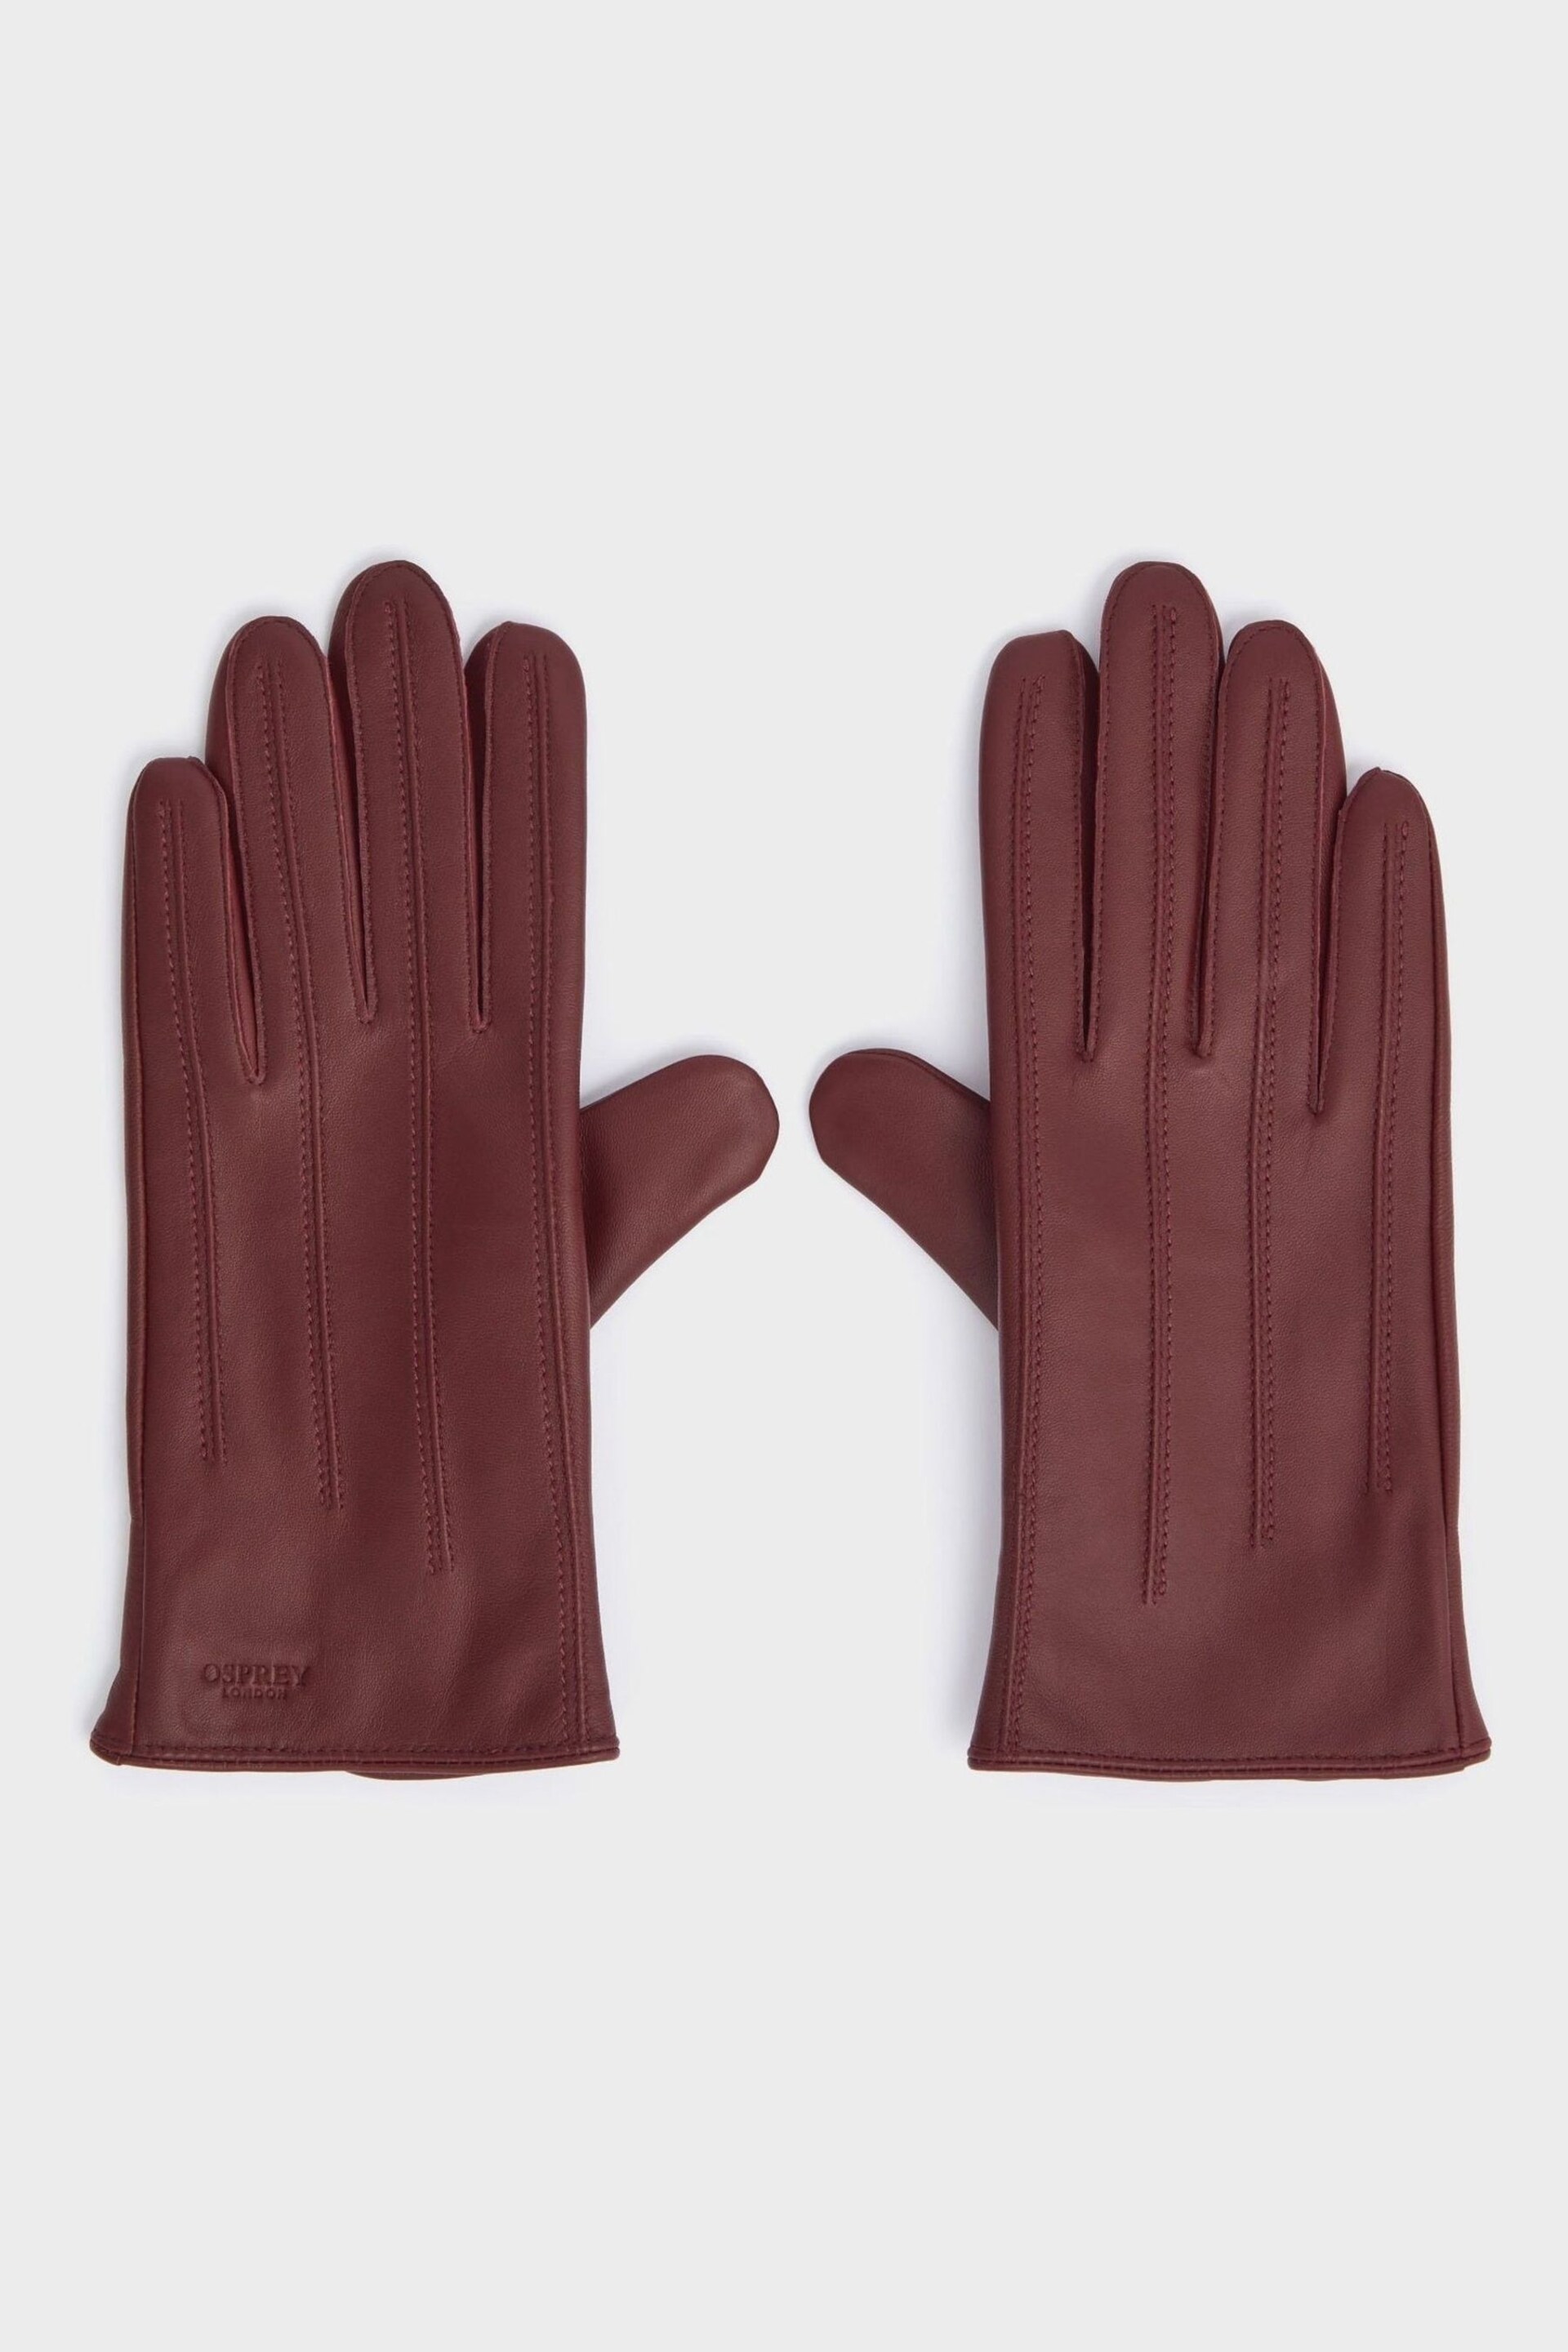 Osprey London Purple The Lila Leather Gloves - Image 2 of 4